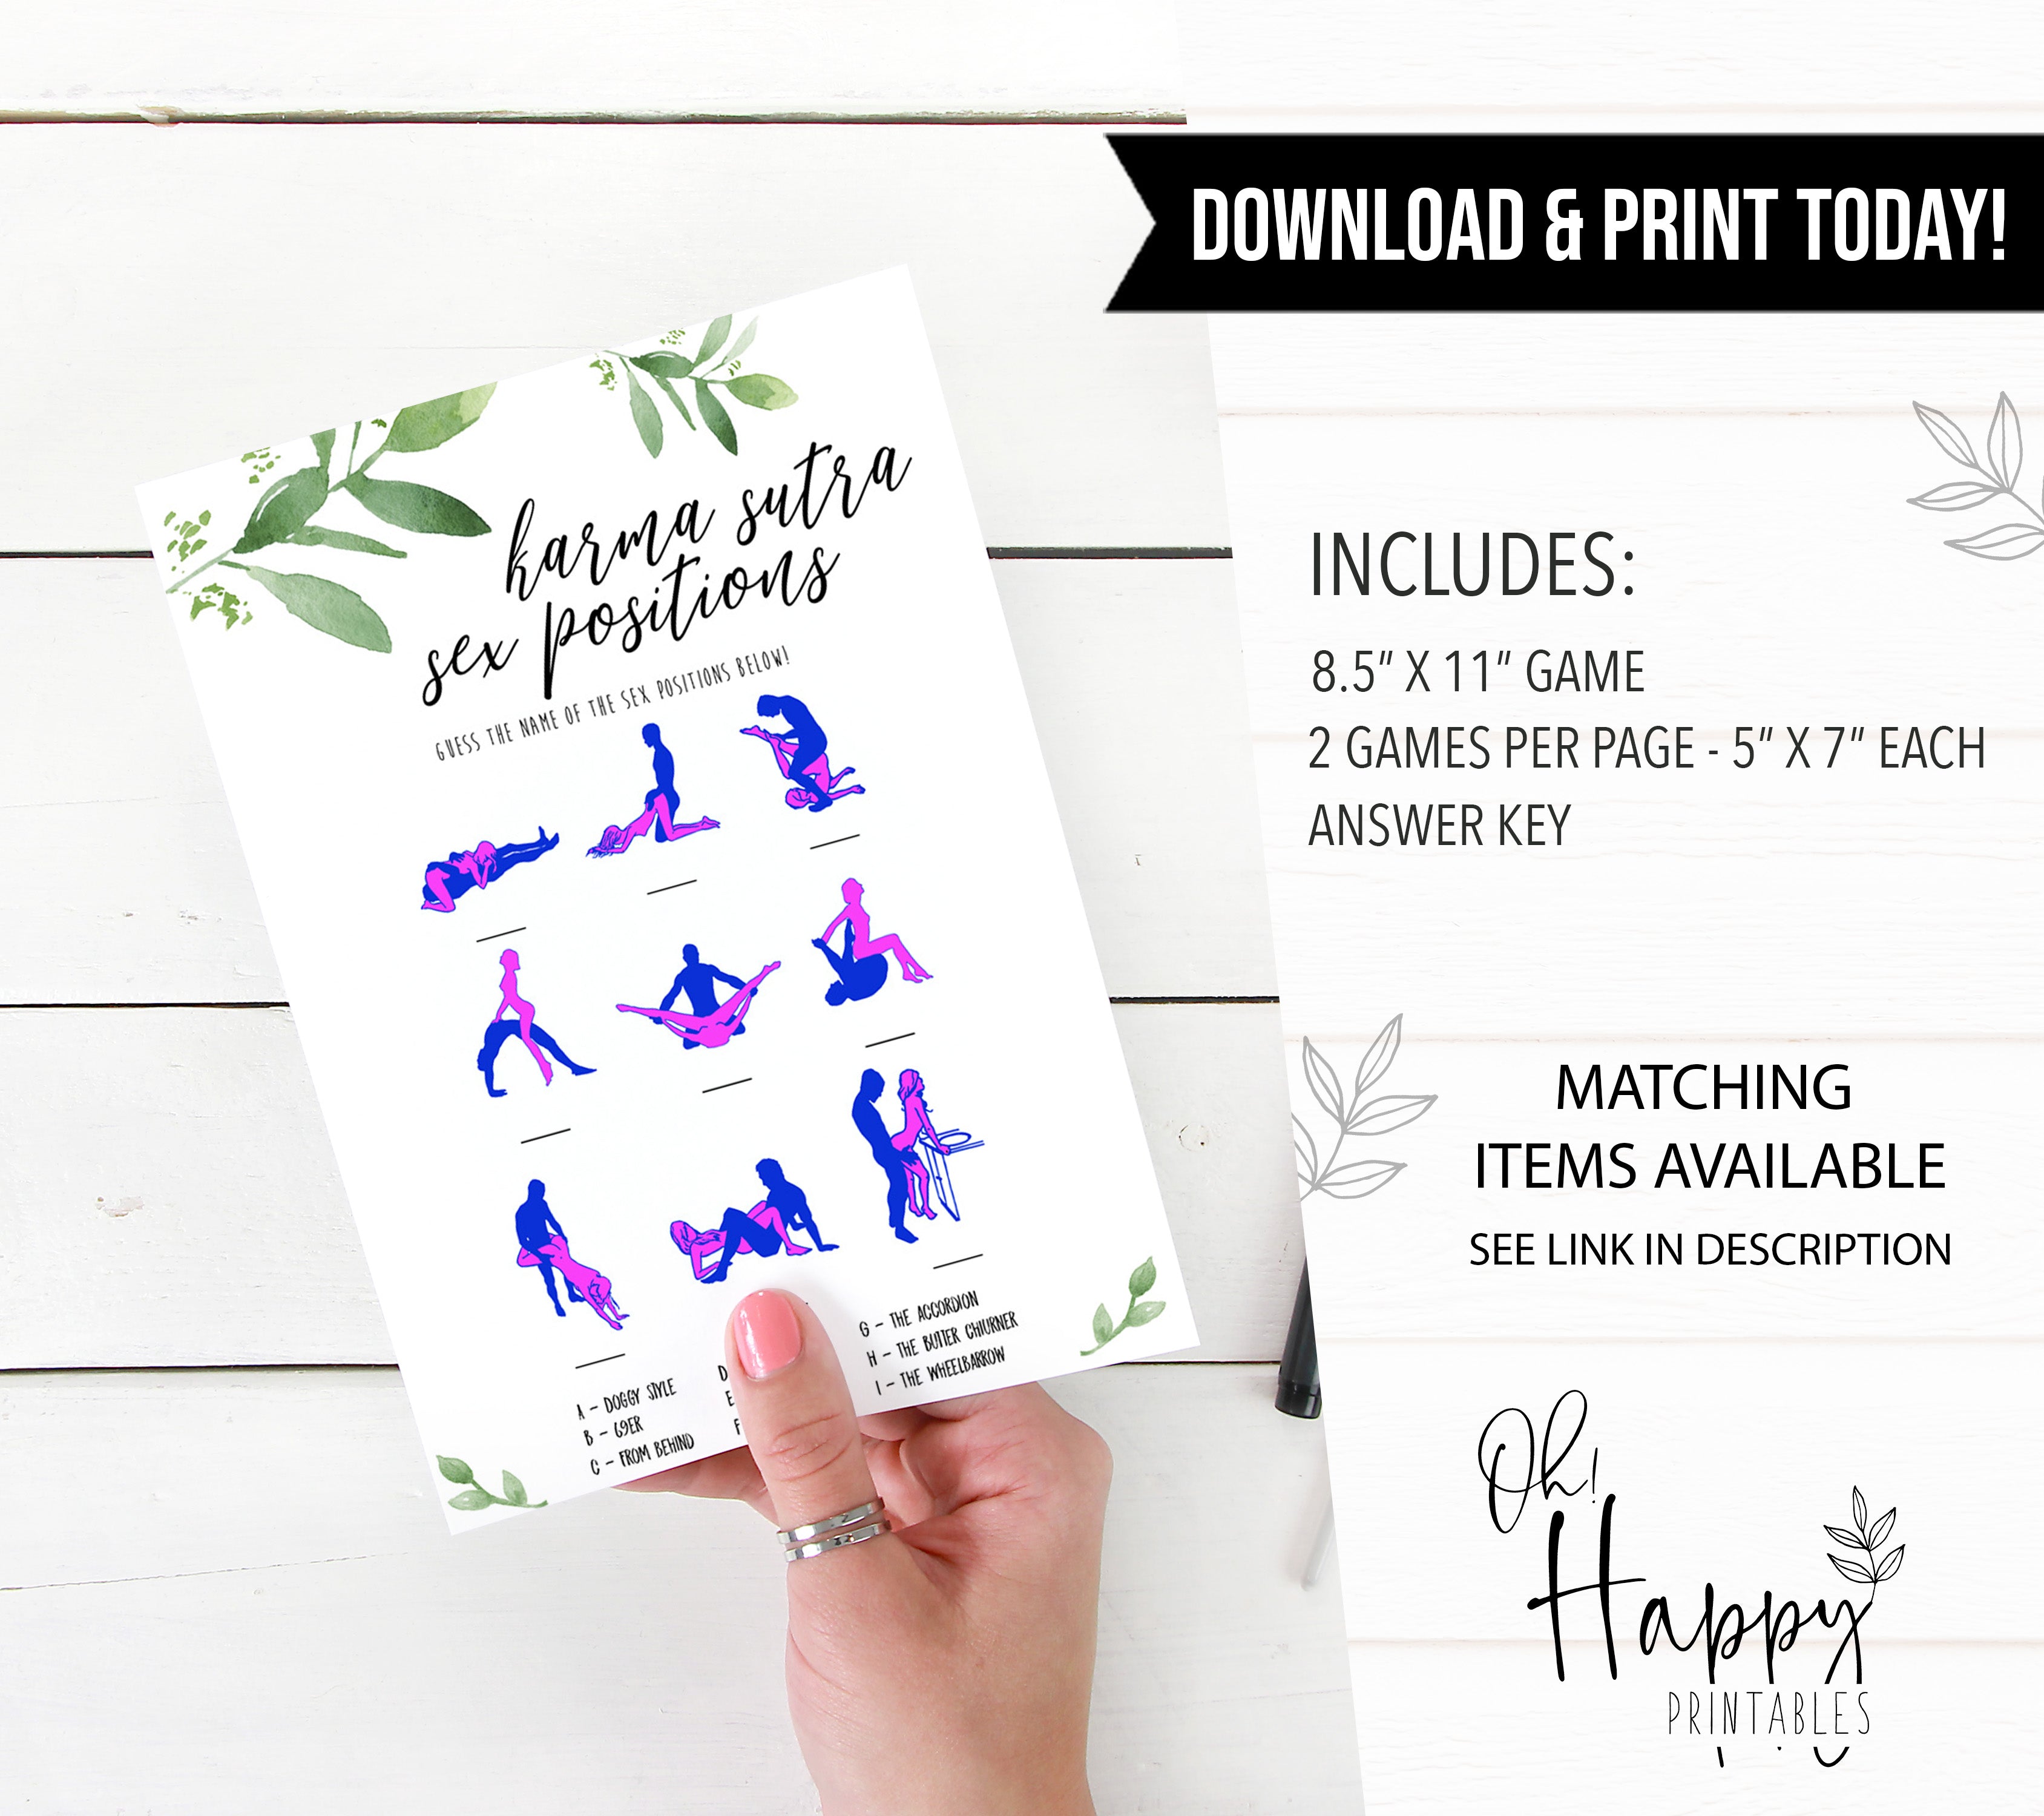 sex positions game, greenery bridal shower, fun bridal shower games, bachelorette party games, floral bridal games, hen party ideas